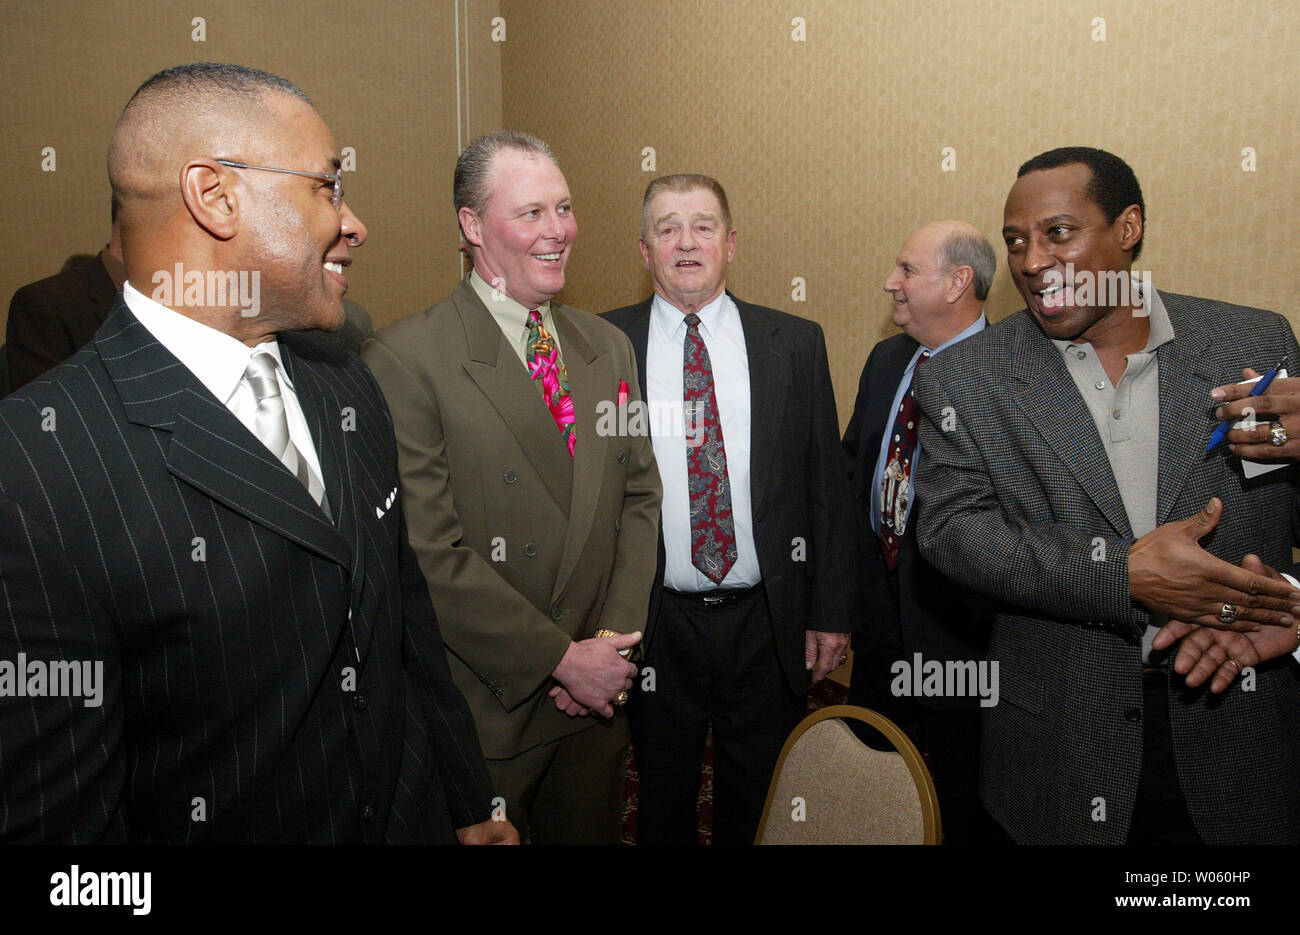 Members of the 1985 St. Louis Cardinals ( to R) Ozzie Smith, Ken Daley, manager Whitey Herzog and Tito Landrum get reaquainted beforre the start of the St. Louis Basaeball Writers Dinner at the Millennium Hotel in St. Louis on January 18, 2005. The 1985 National League Championship team was recognized along with current players during the dinner.   (UPI Photo/Bill Greenblatt) Stock Photo